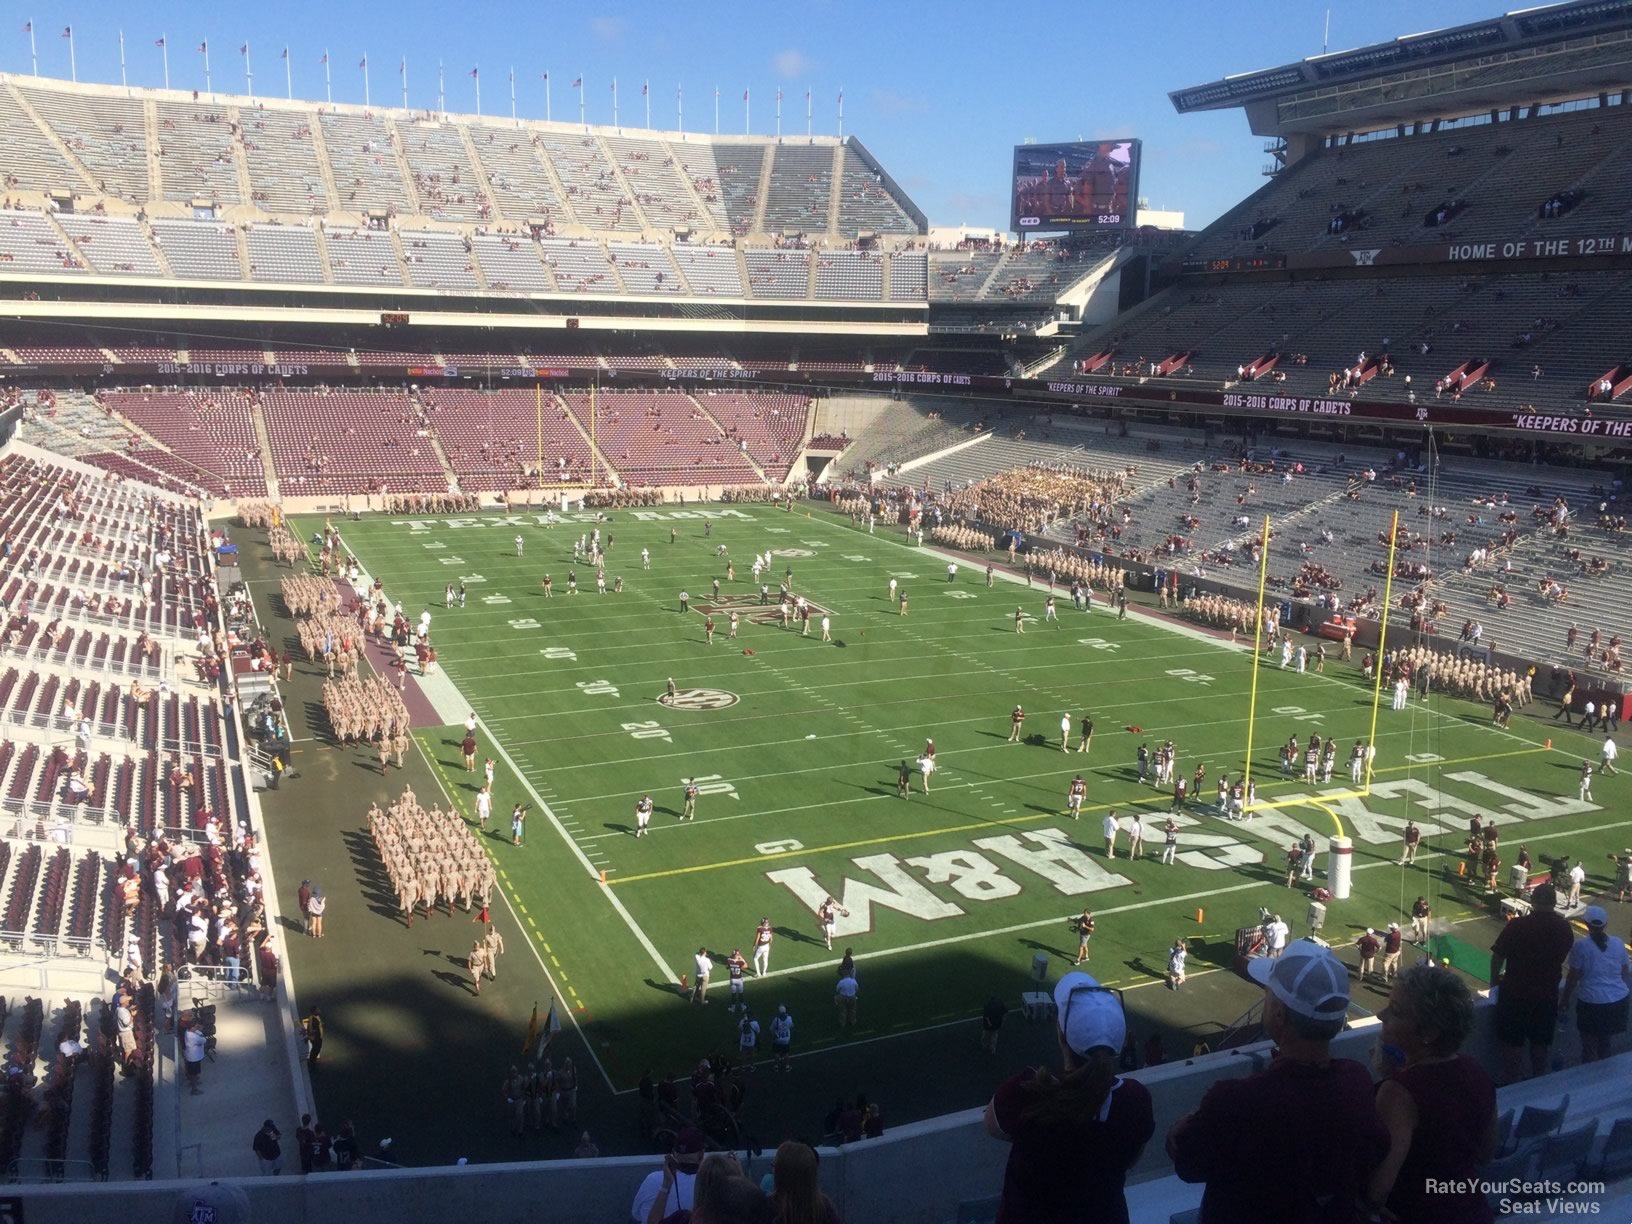 section 245, row 11 seat view  - kyle field